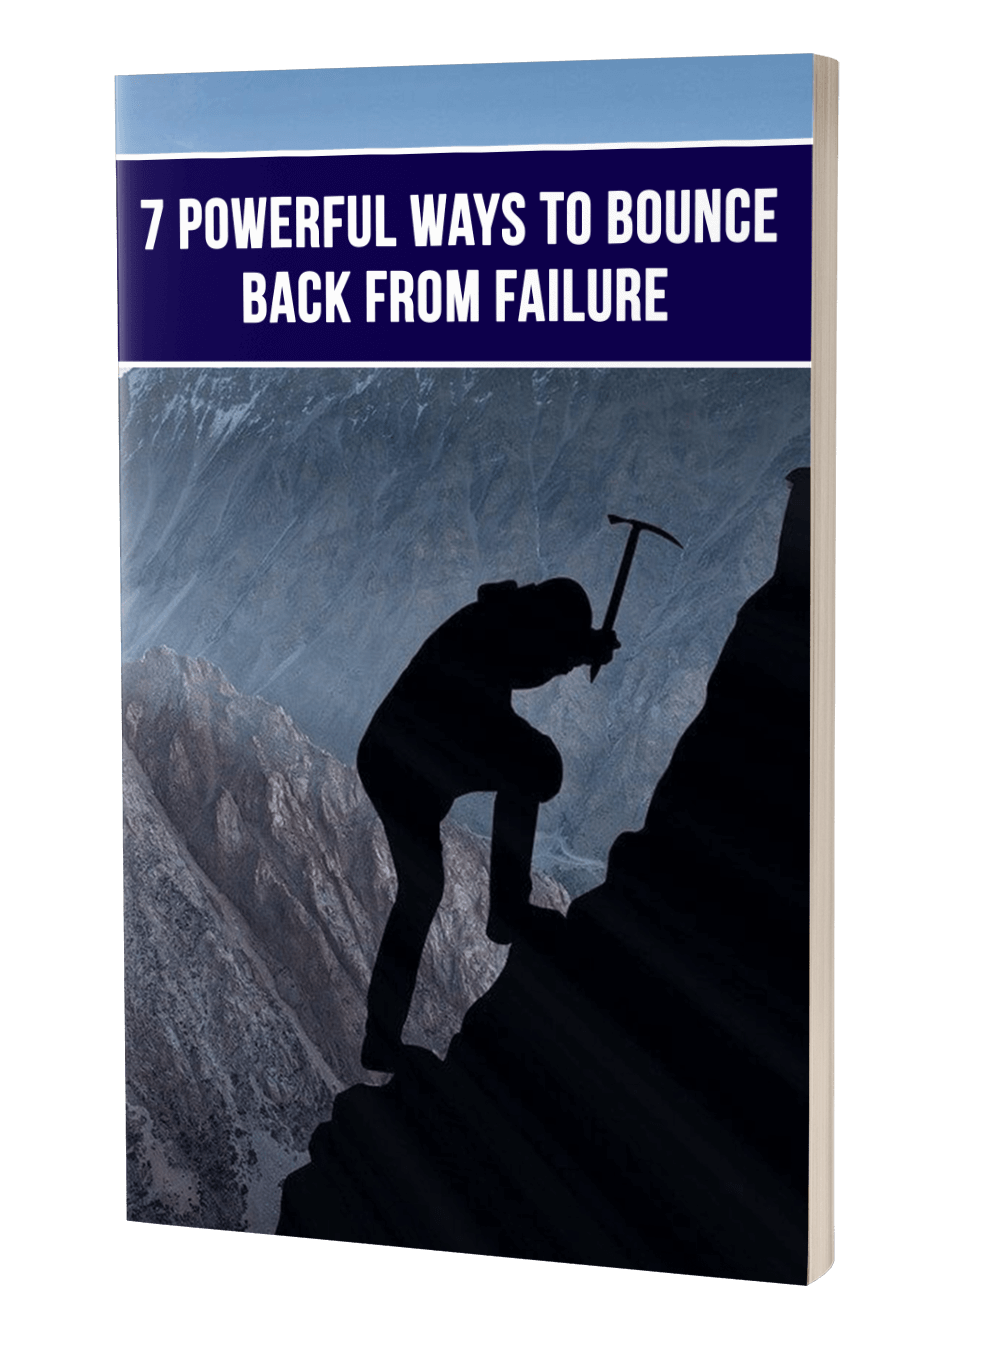 7 Powerful Ways to Bounce Back From Failure